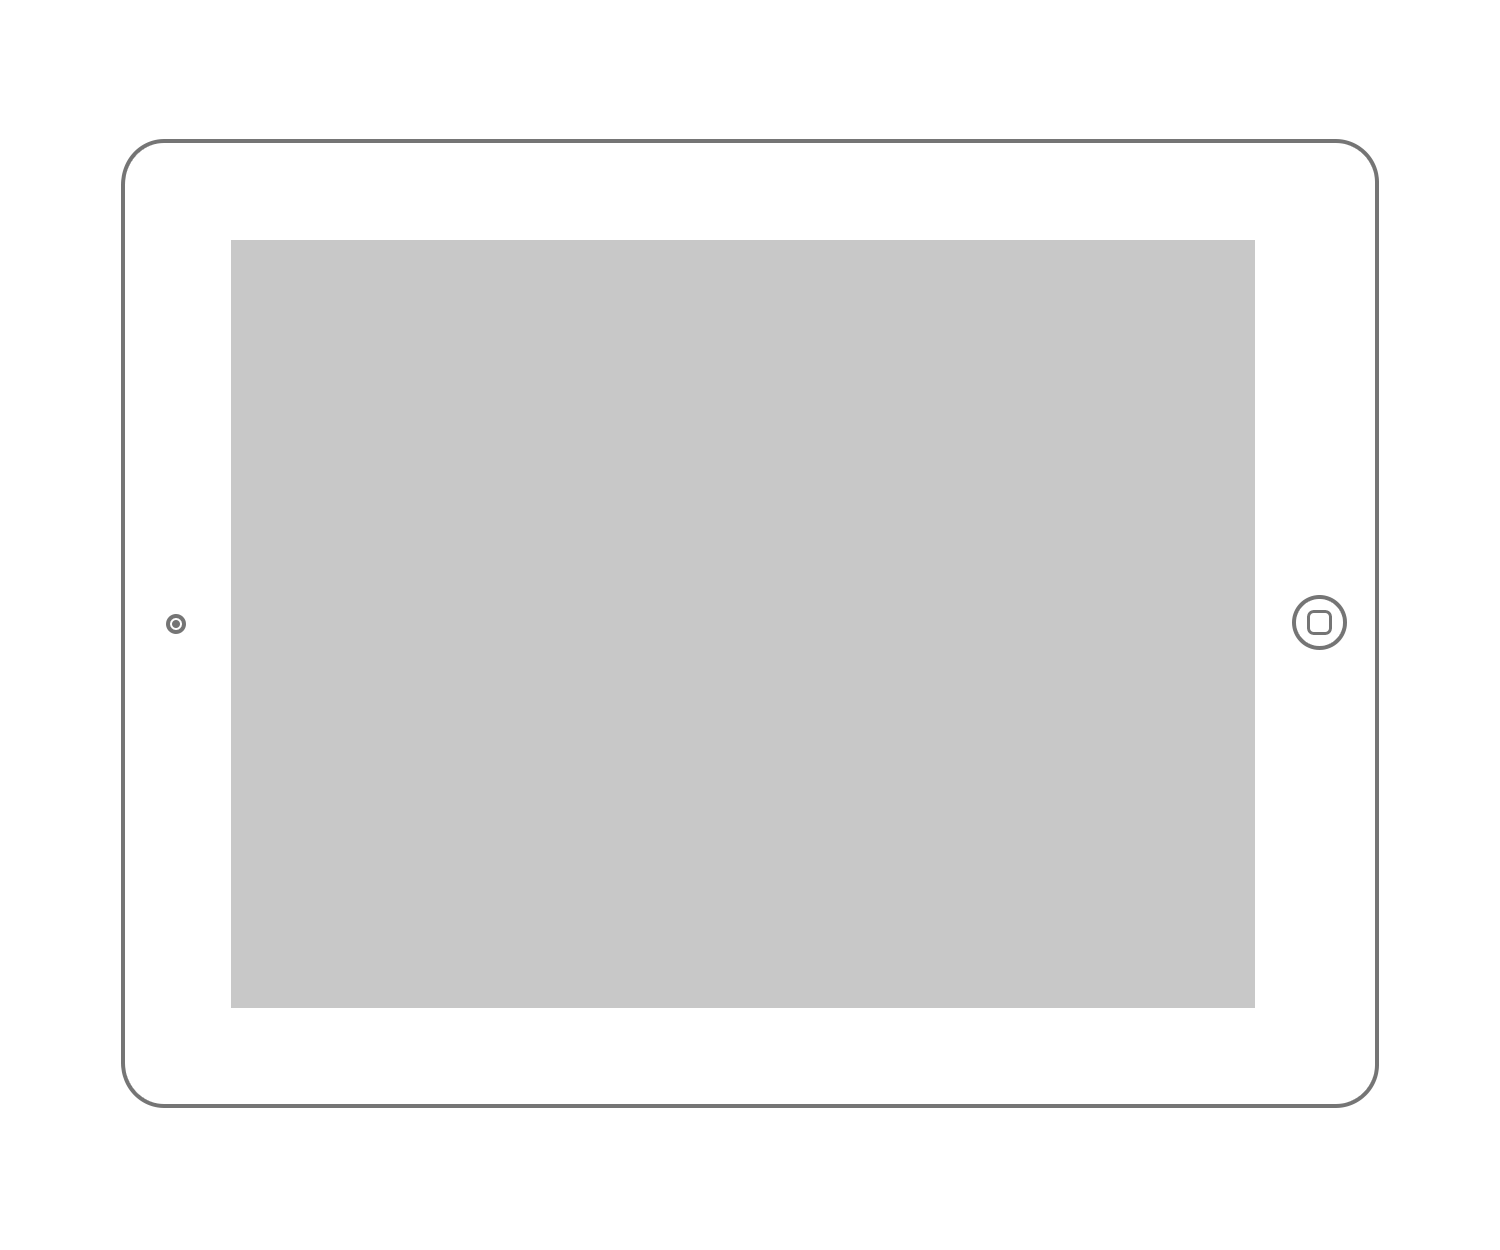 Ipad In PNG Transparent Background, Free Download #23944 - FreeIconsPNG